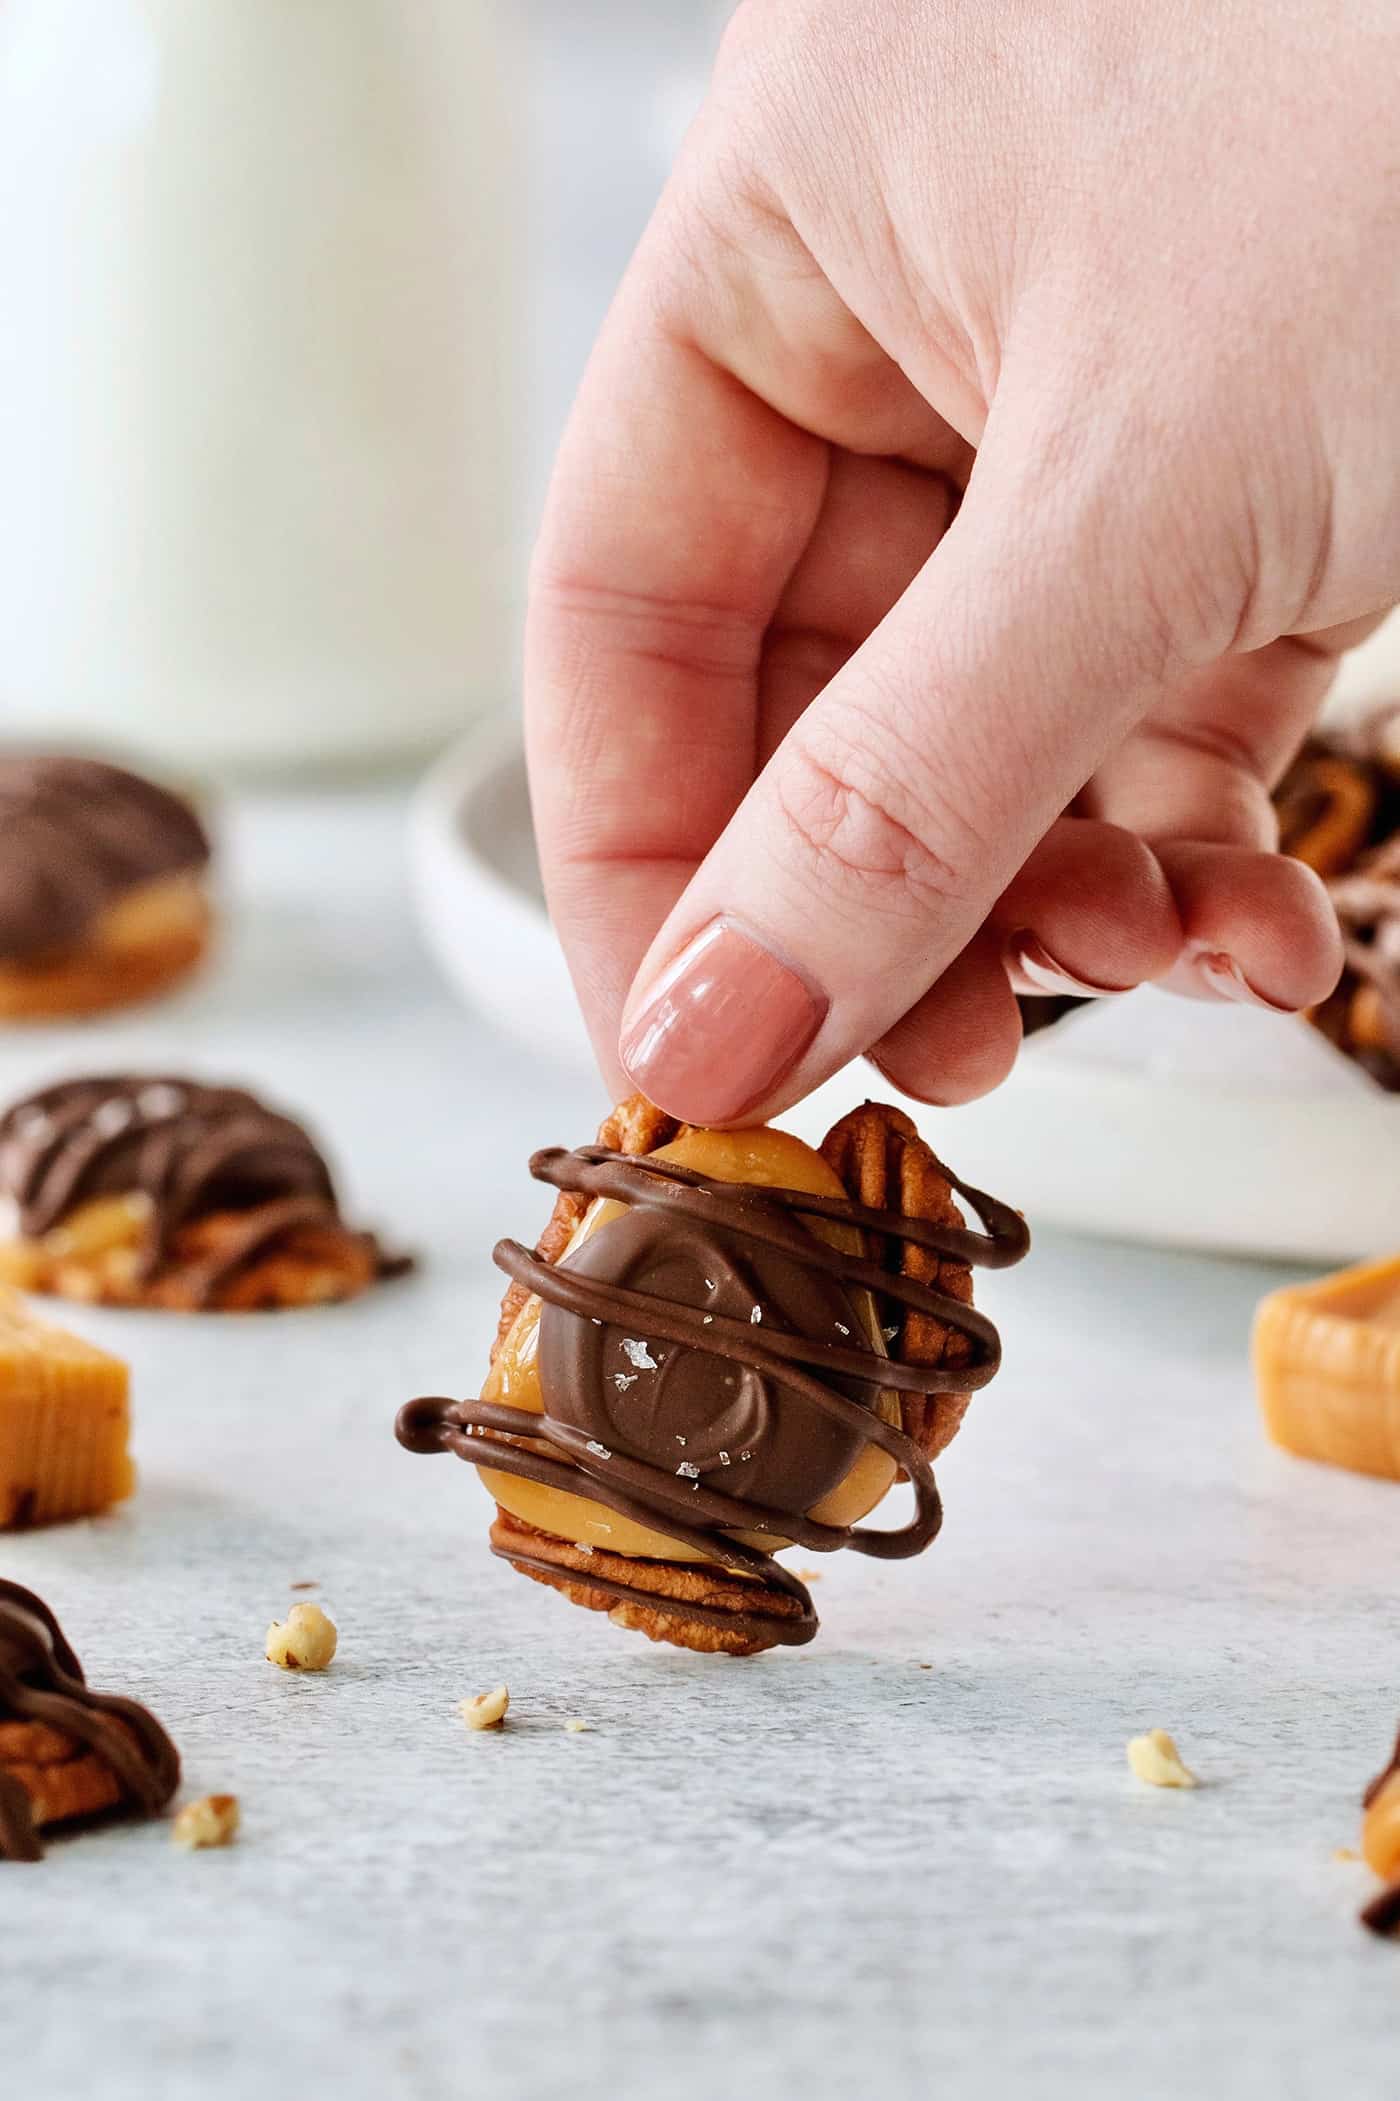 A hand lifts up a chocolate turtle candy that contains a layer of pecans, caramel, chocolate, drizzled chocolate, and flaky salt. More turtles can be see in the background.